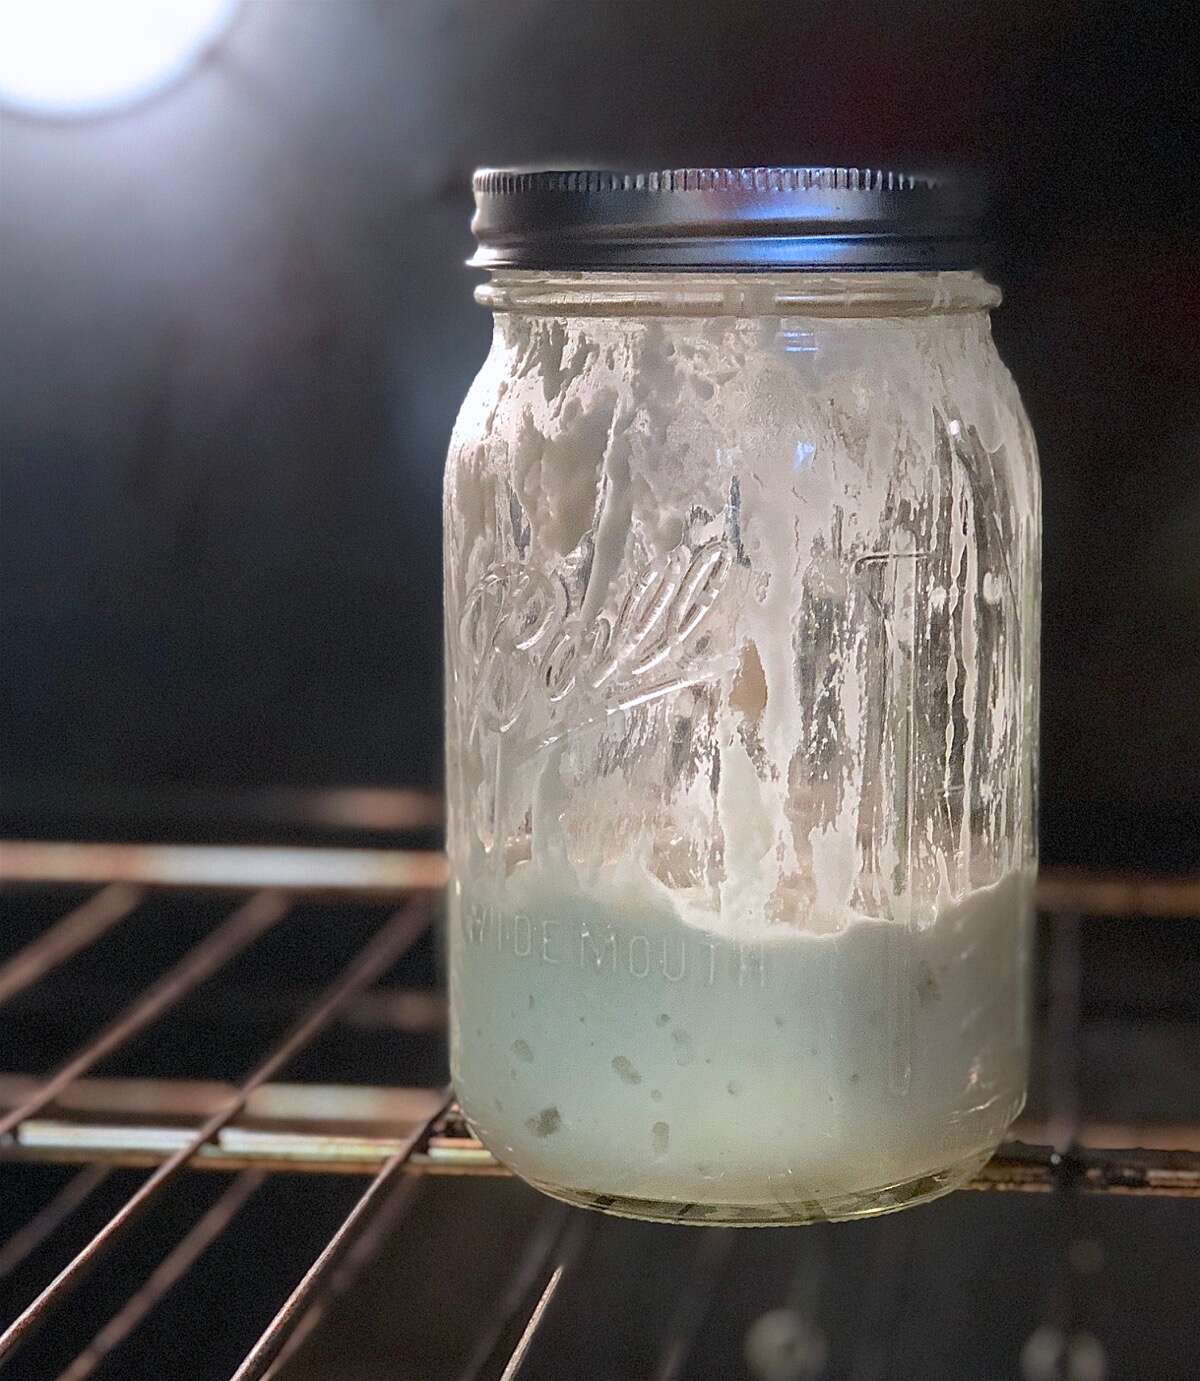 Glass jar of unrisen starter in the turned-off oven, waiting to rise.